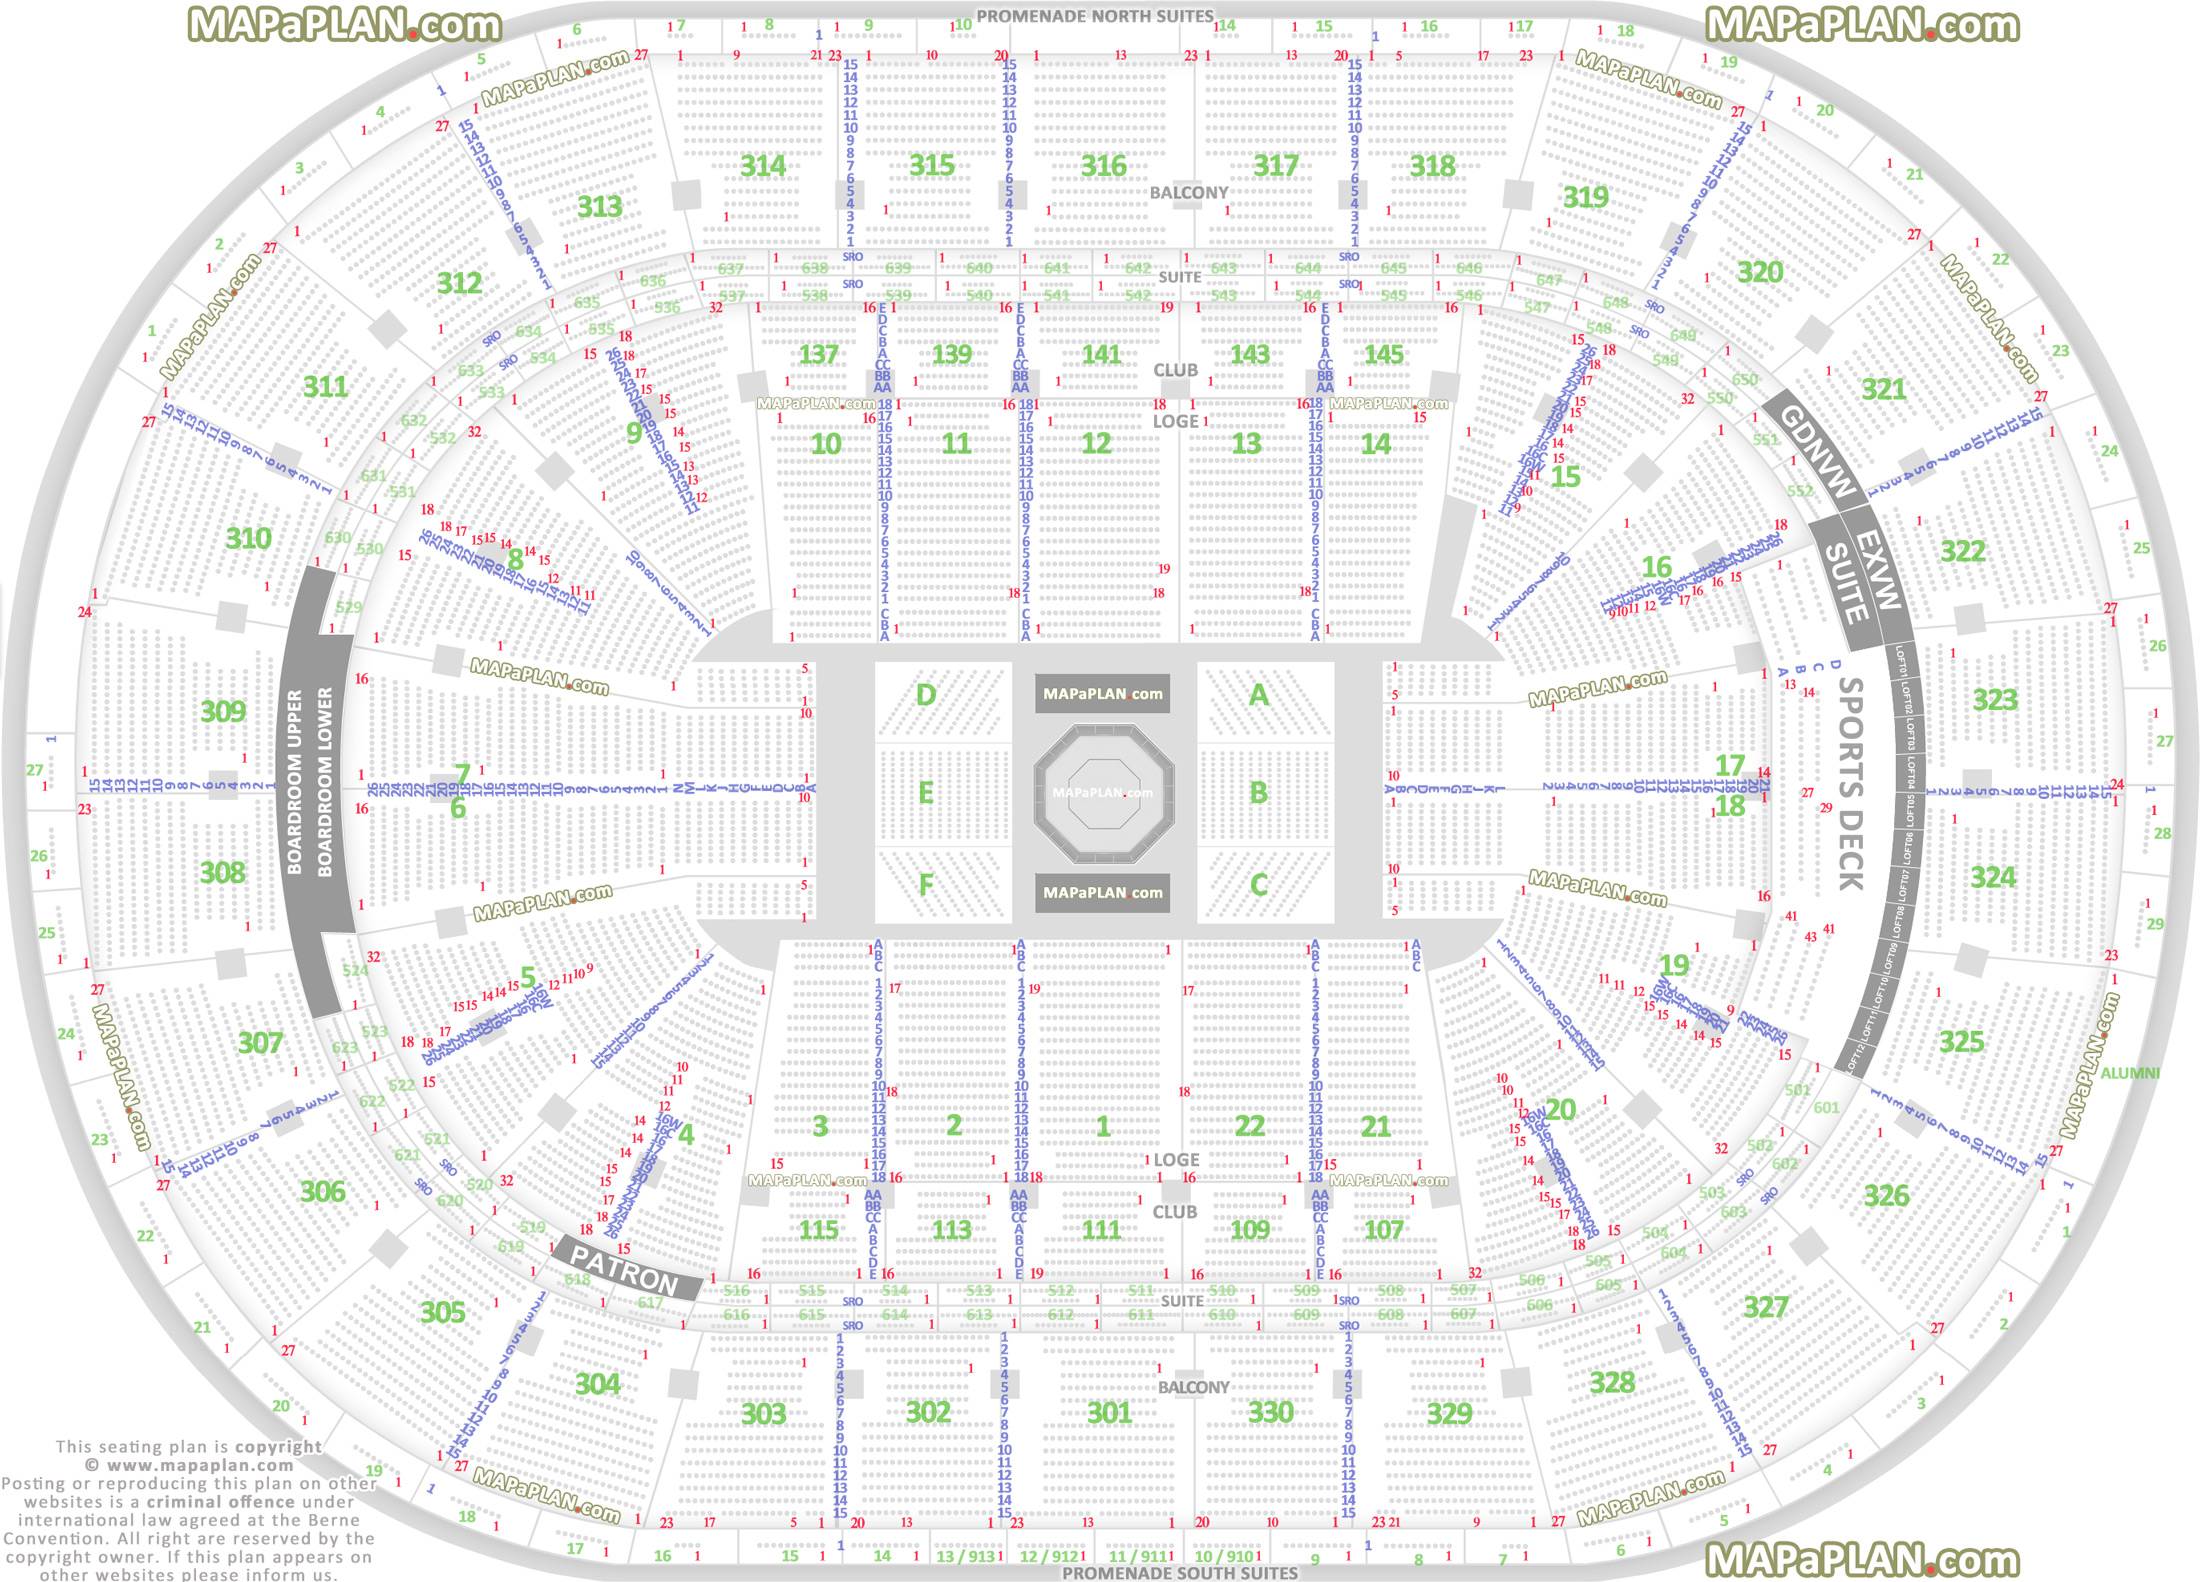 ufc mma fully seated chart garden executive view suites layout wwe wrestling boxing events Boston TD Garden seating chart